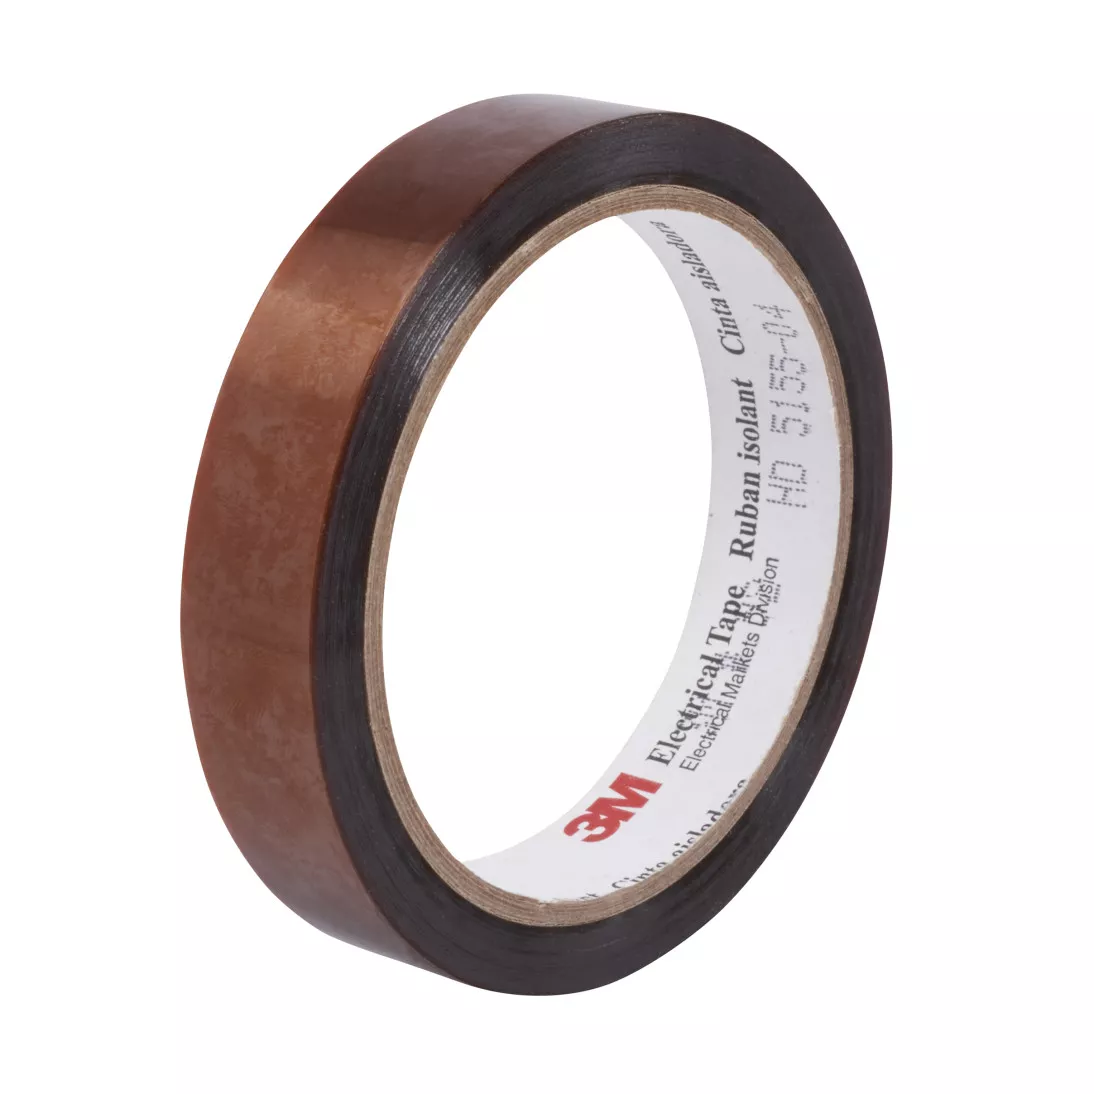 3M™ Polyimide Film Electrical Tape 92, 12 mm x 33 m, 19 Rolls/Case